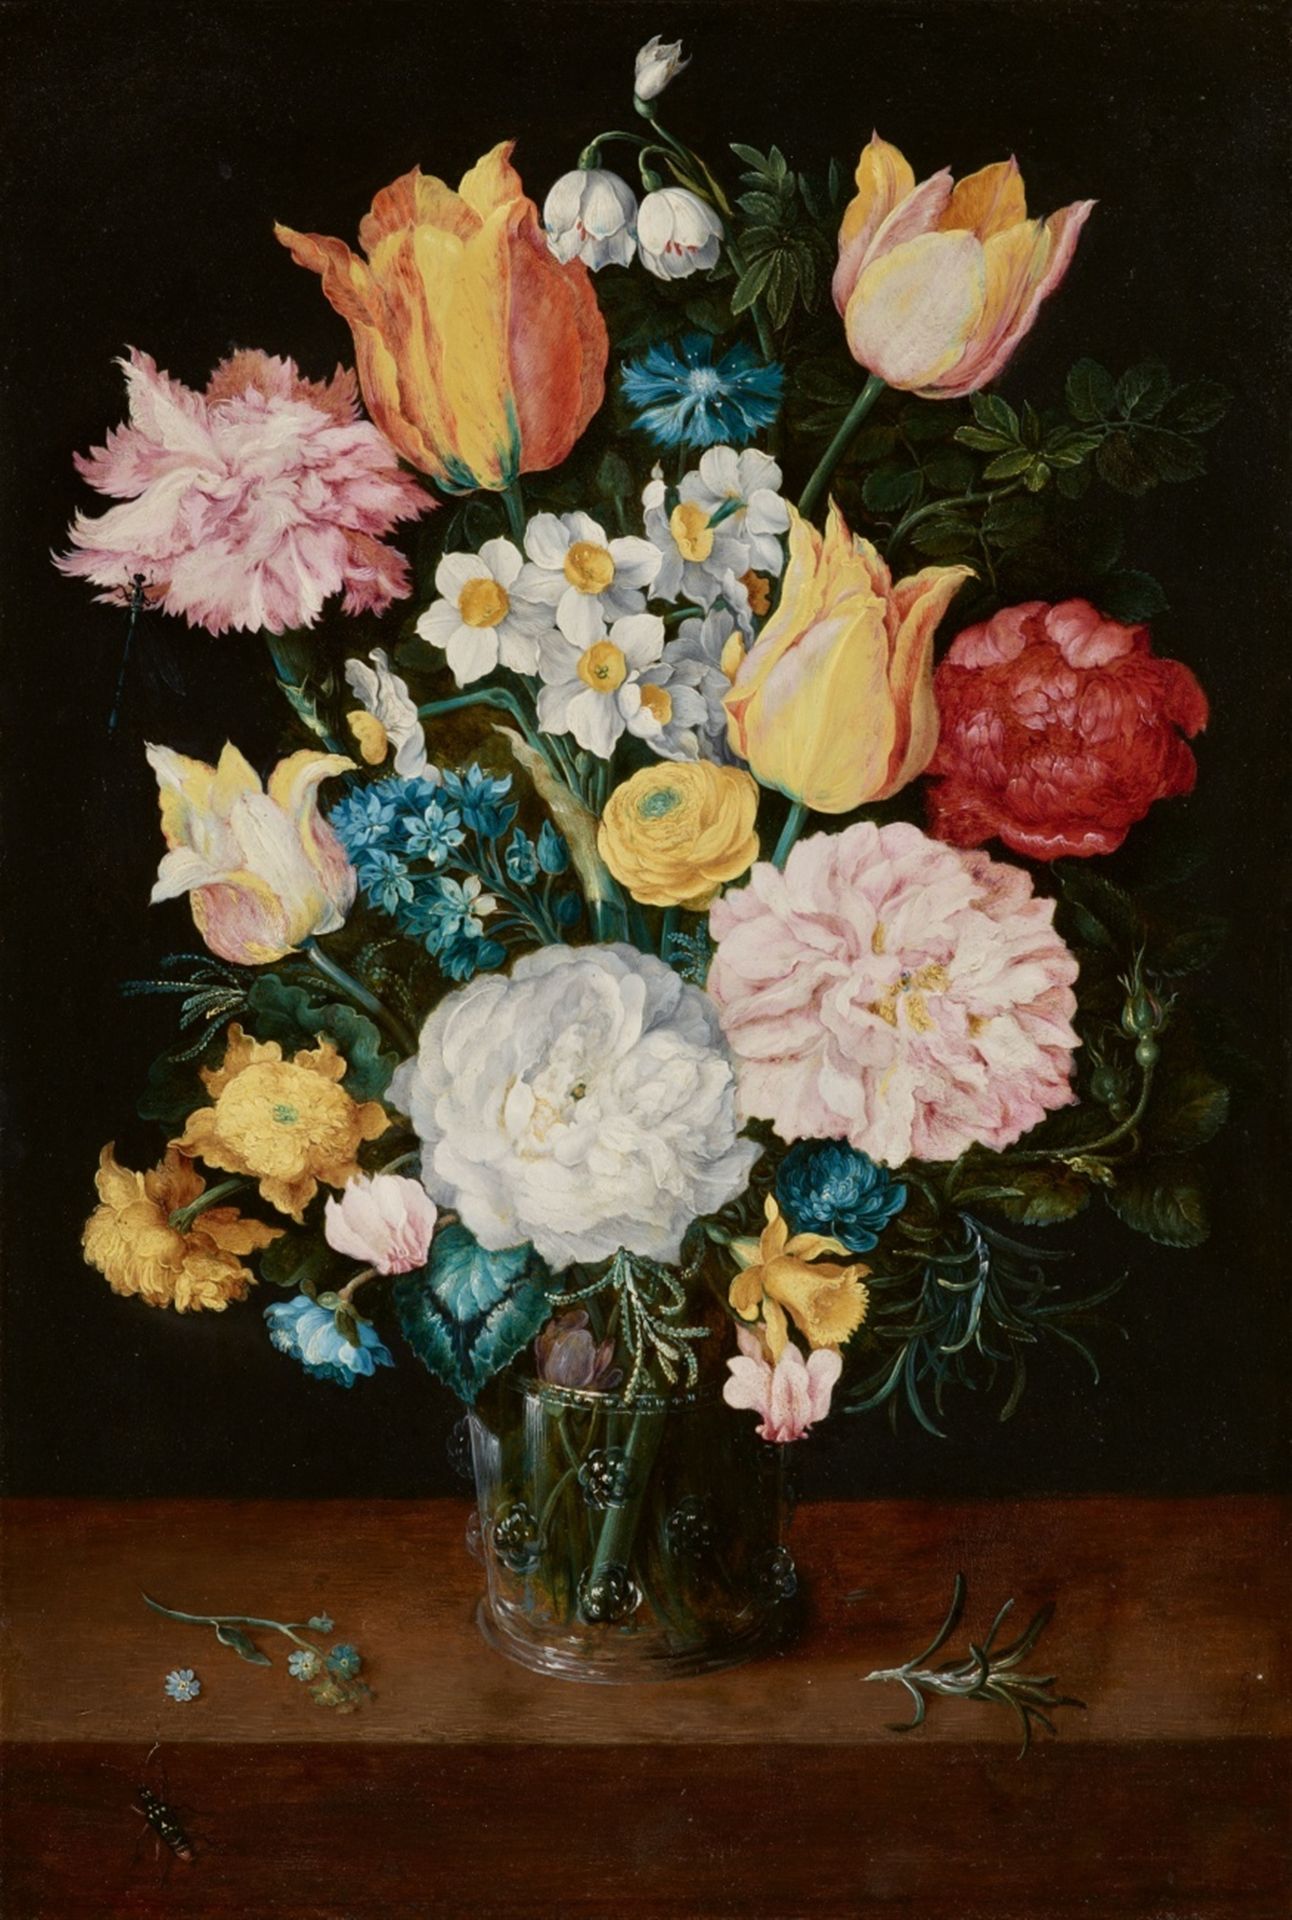 Jan Brueghel the Younger<BR>Jan Brueghel the Elder<BR>Still Life with Tulips, Roses, Narcissi, Forge